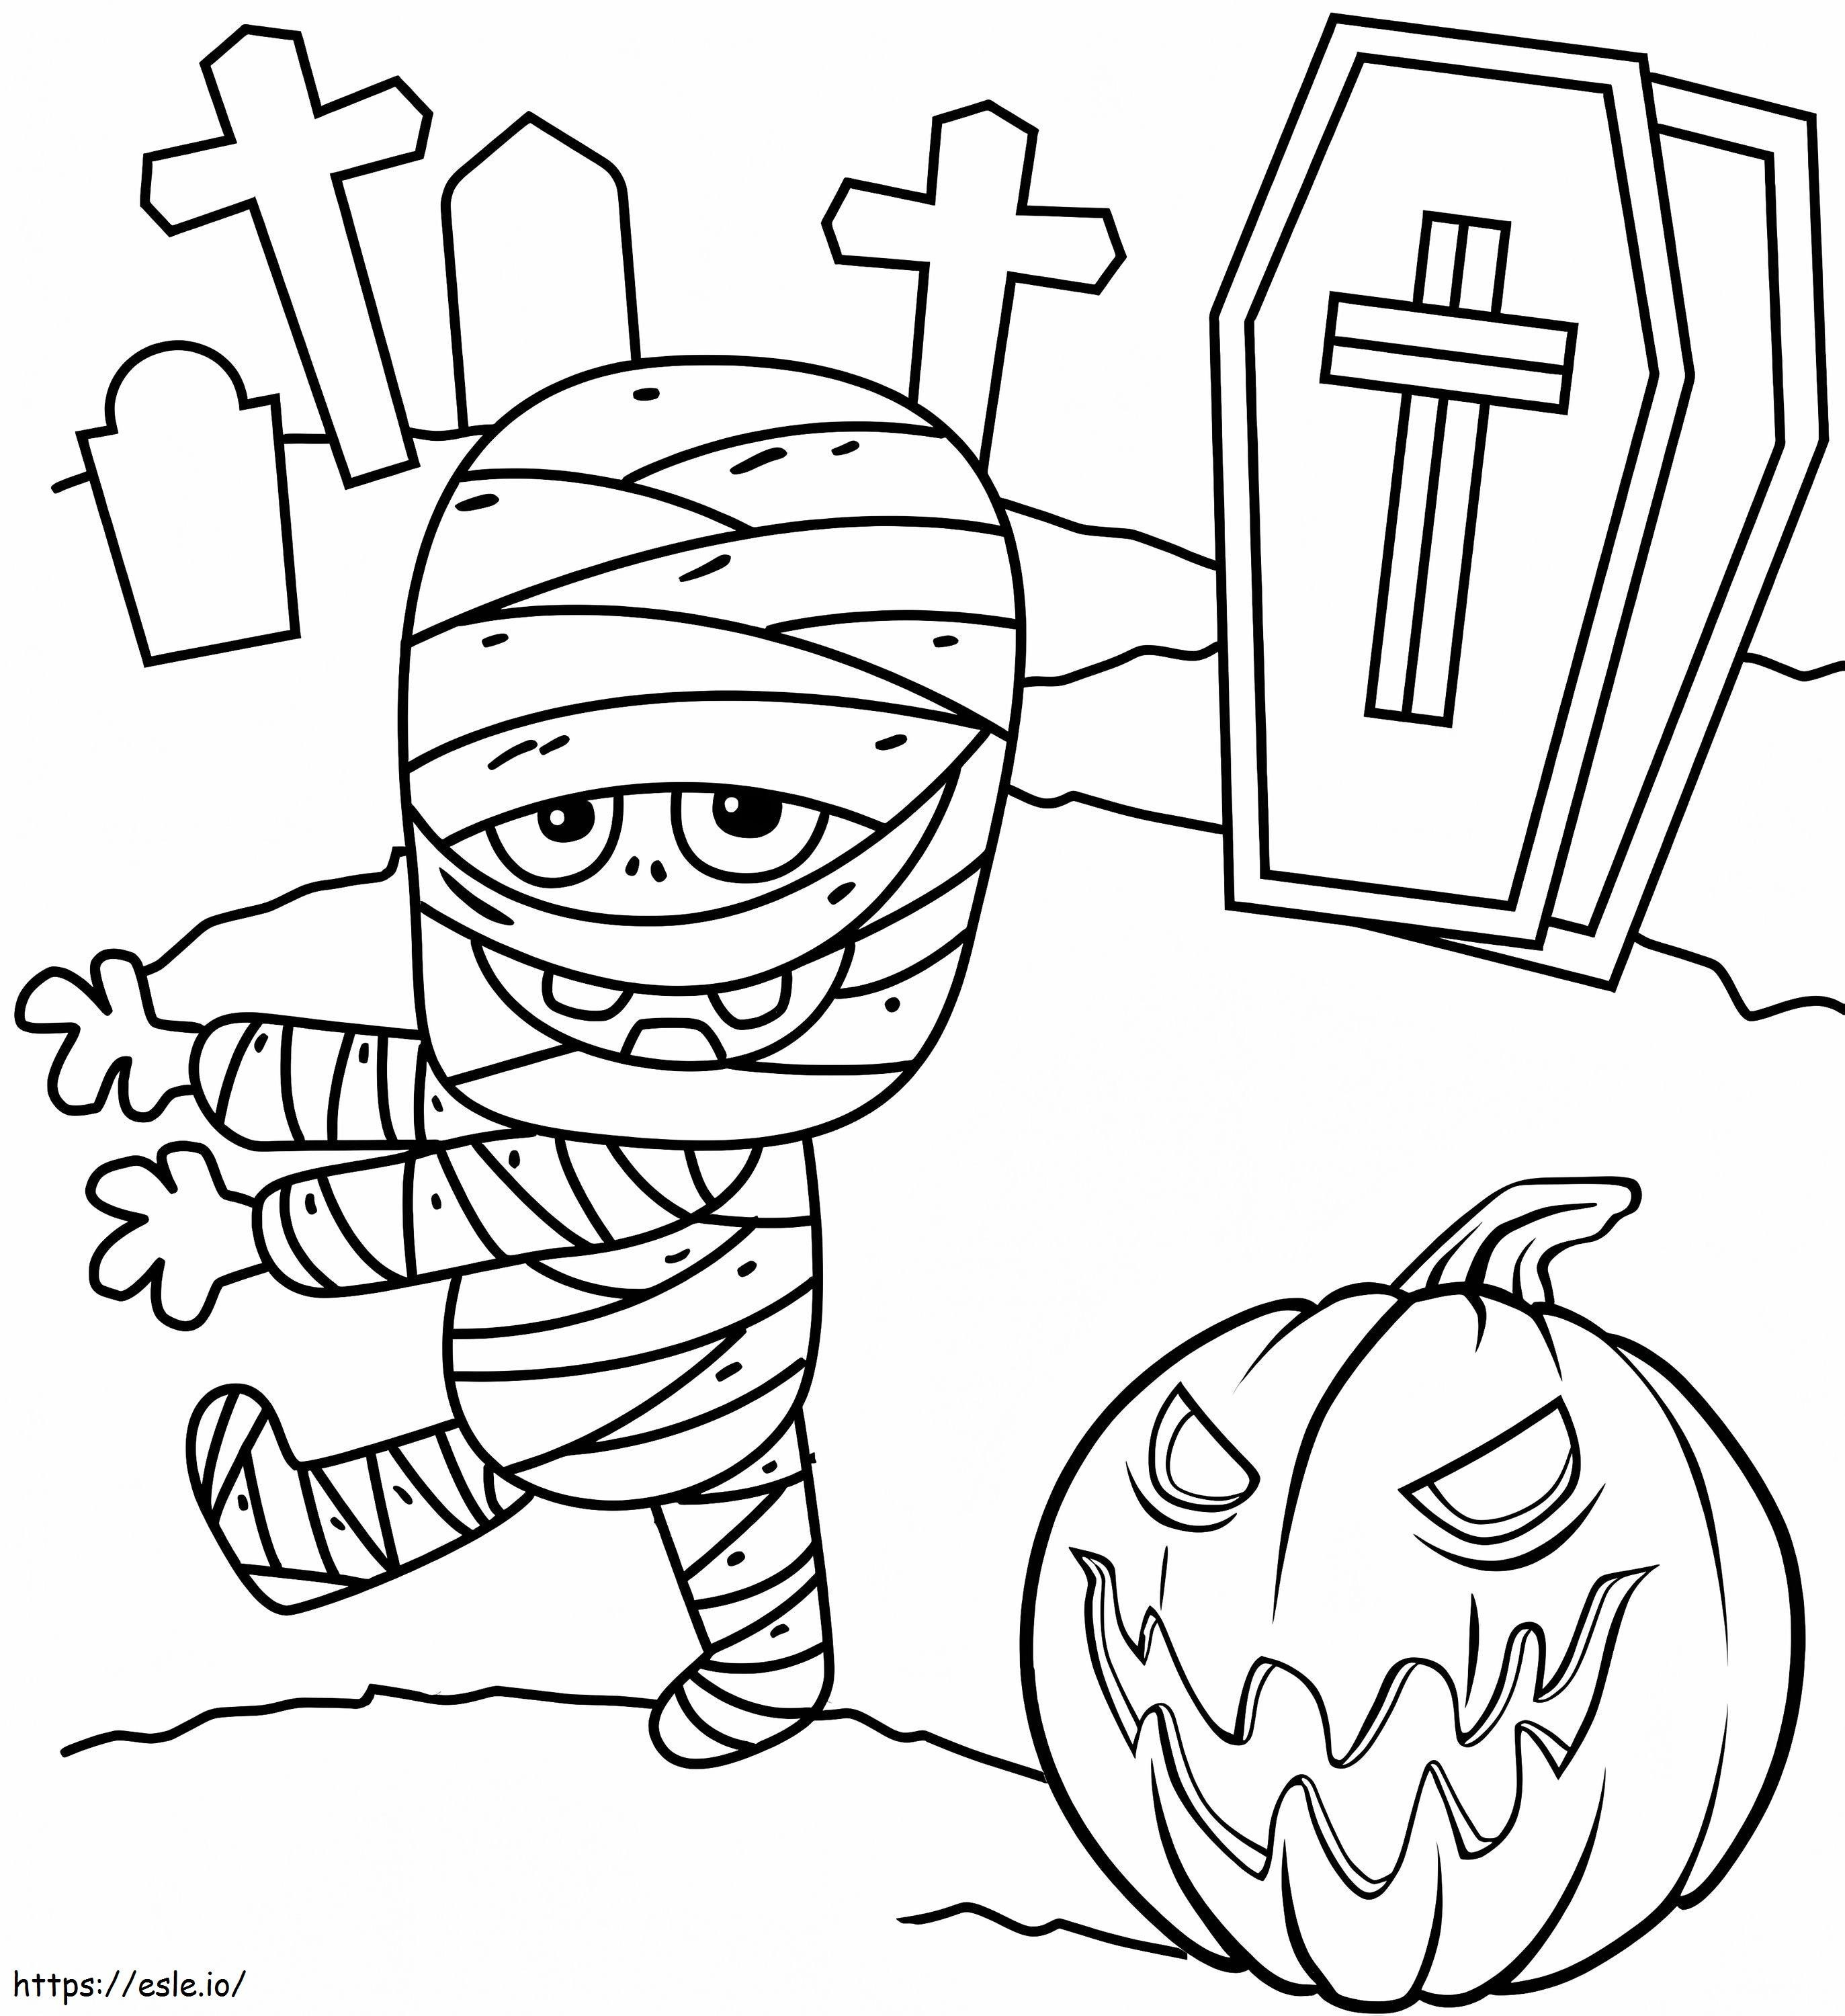 Smiling Mummy coloring page